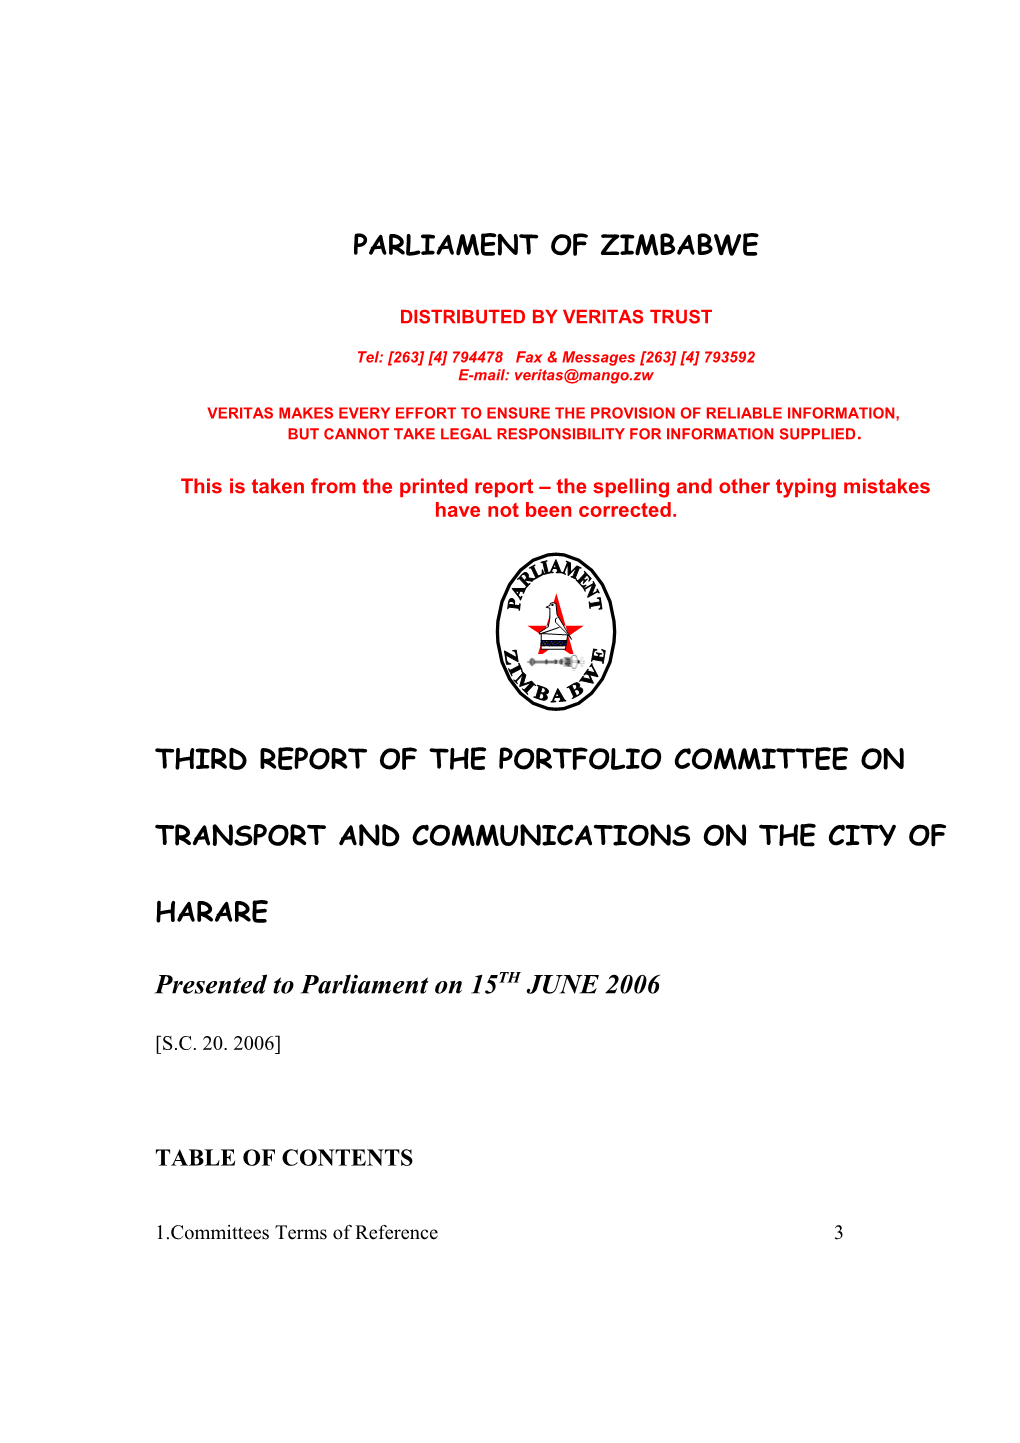 06SC19 Ppctransport-City of Harare